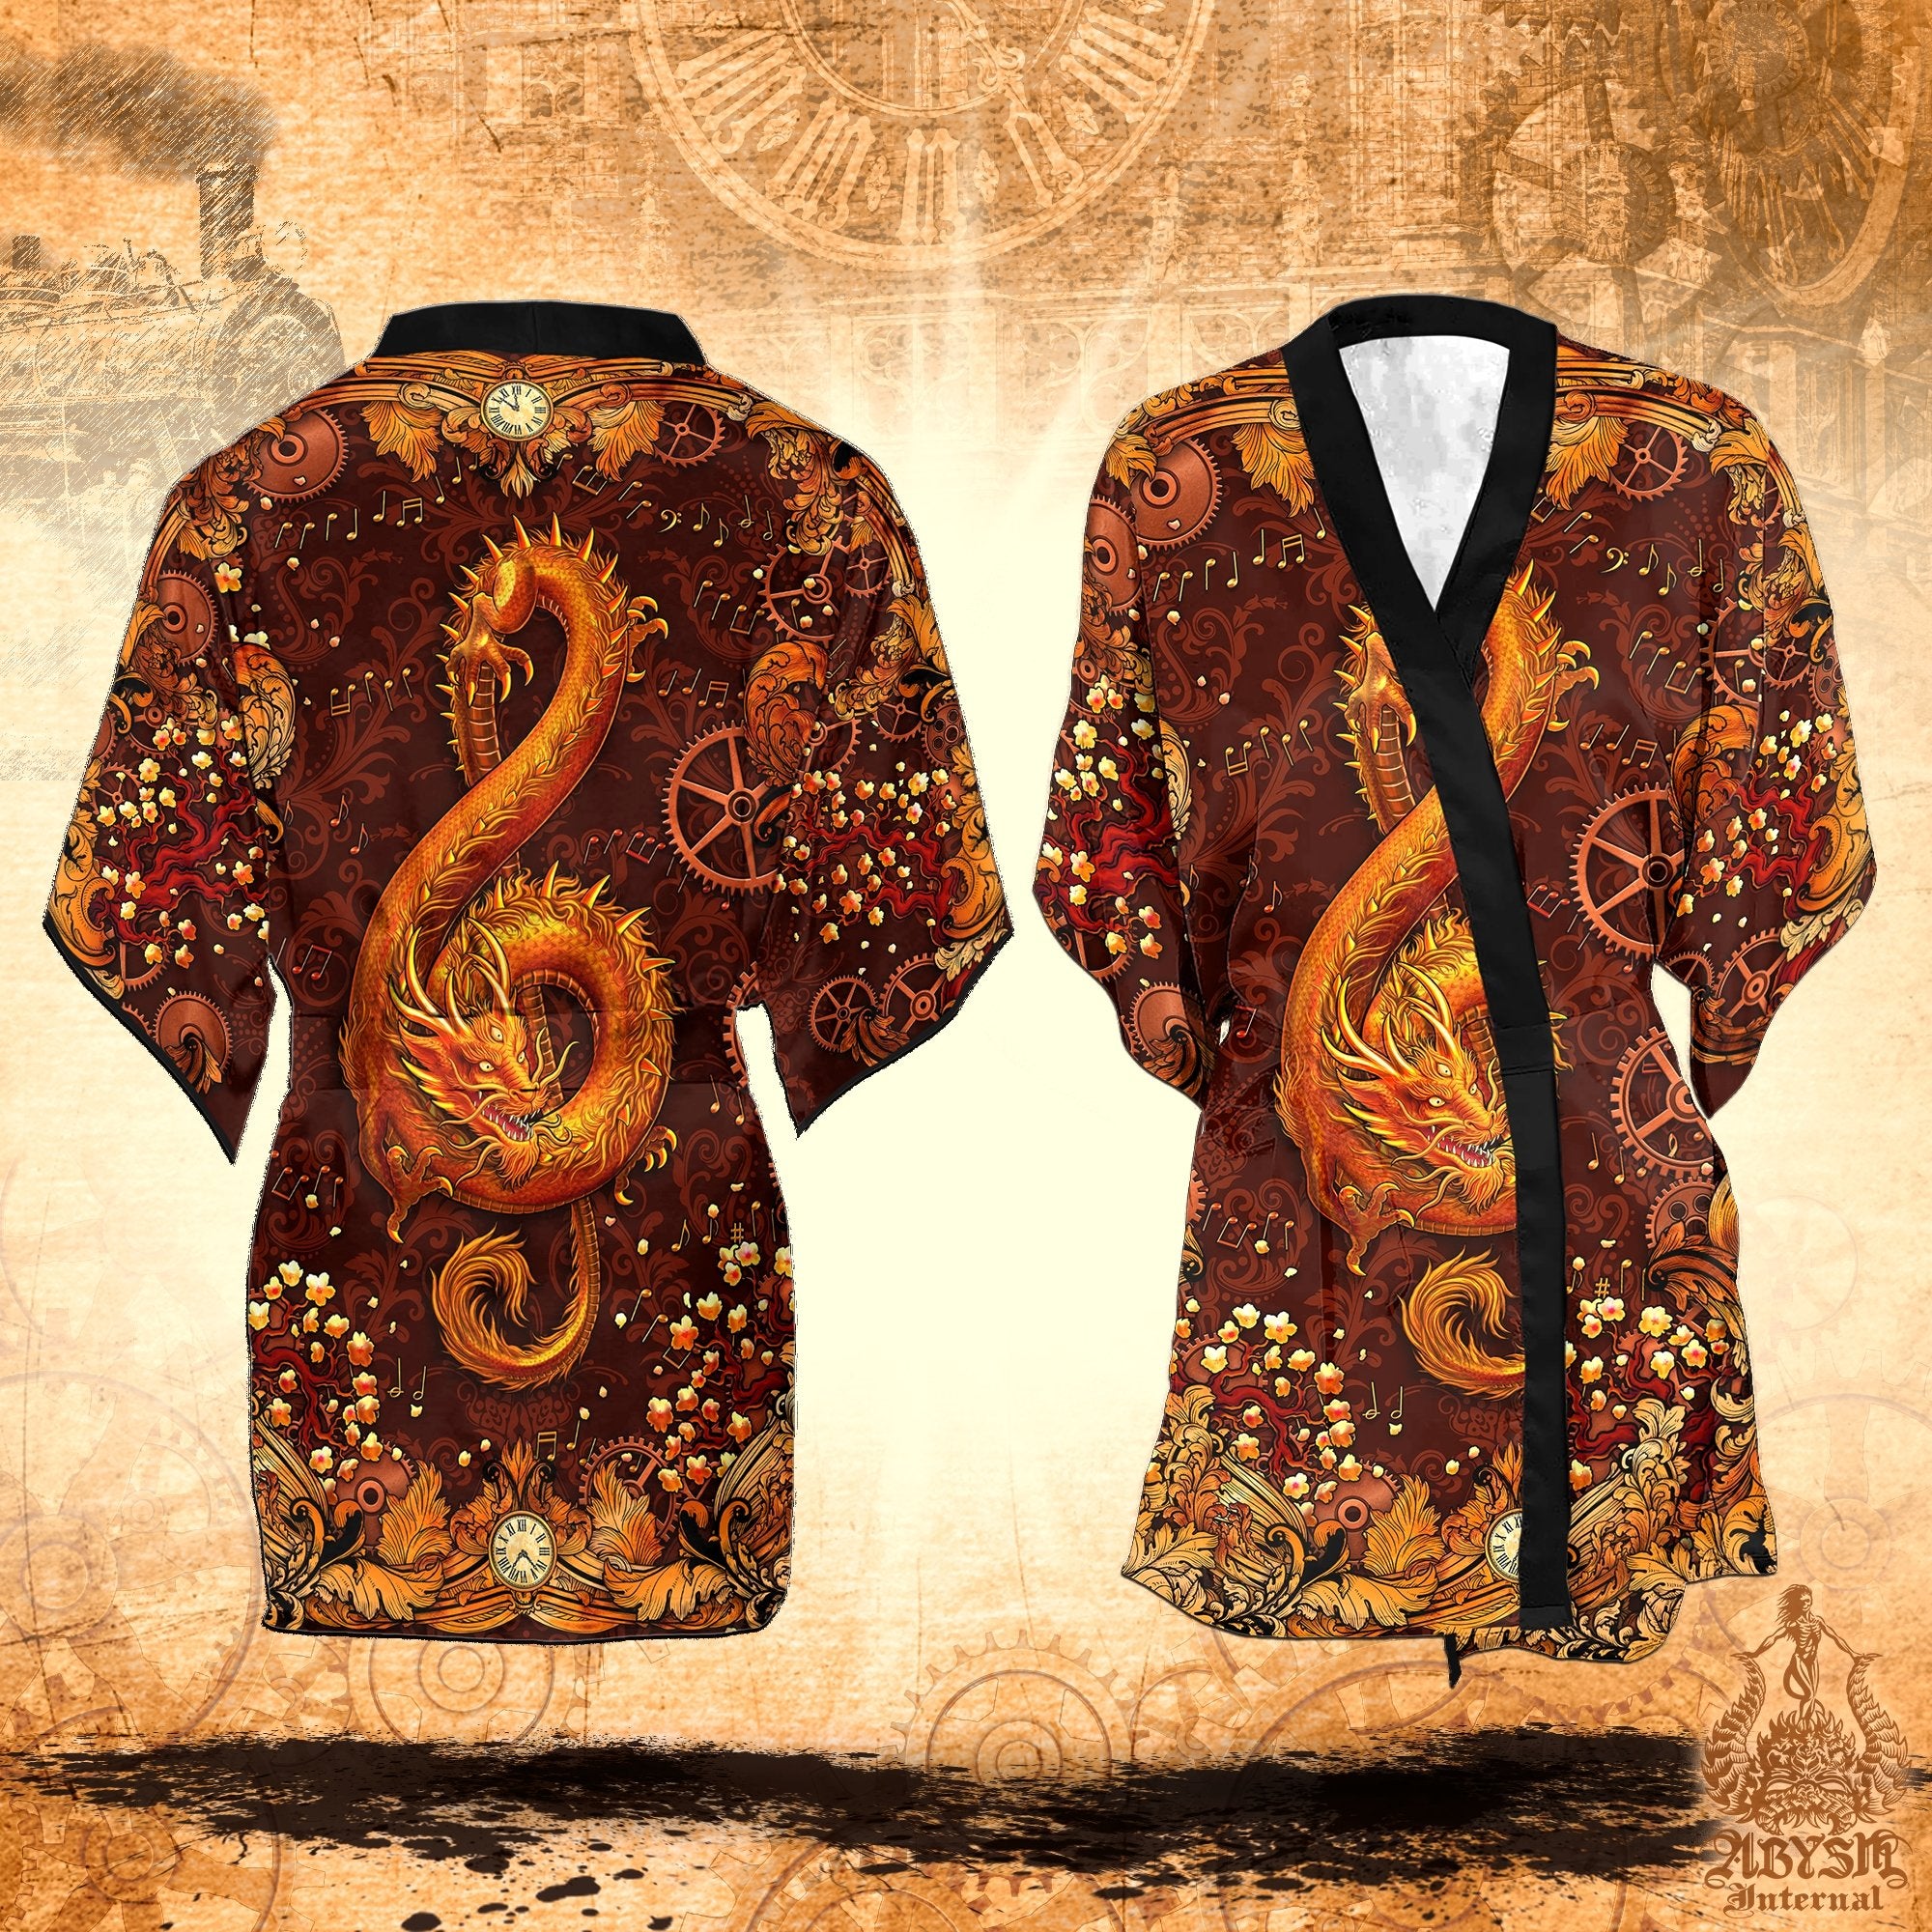 Music Cover Up, Beach Outfit, Party Kimono, Summer Festival Robe, Boho Indie and Alternative Clothing, Unisex - Dragon, Steampunk - Abysm Internal